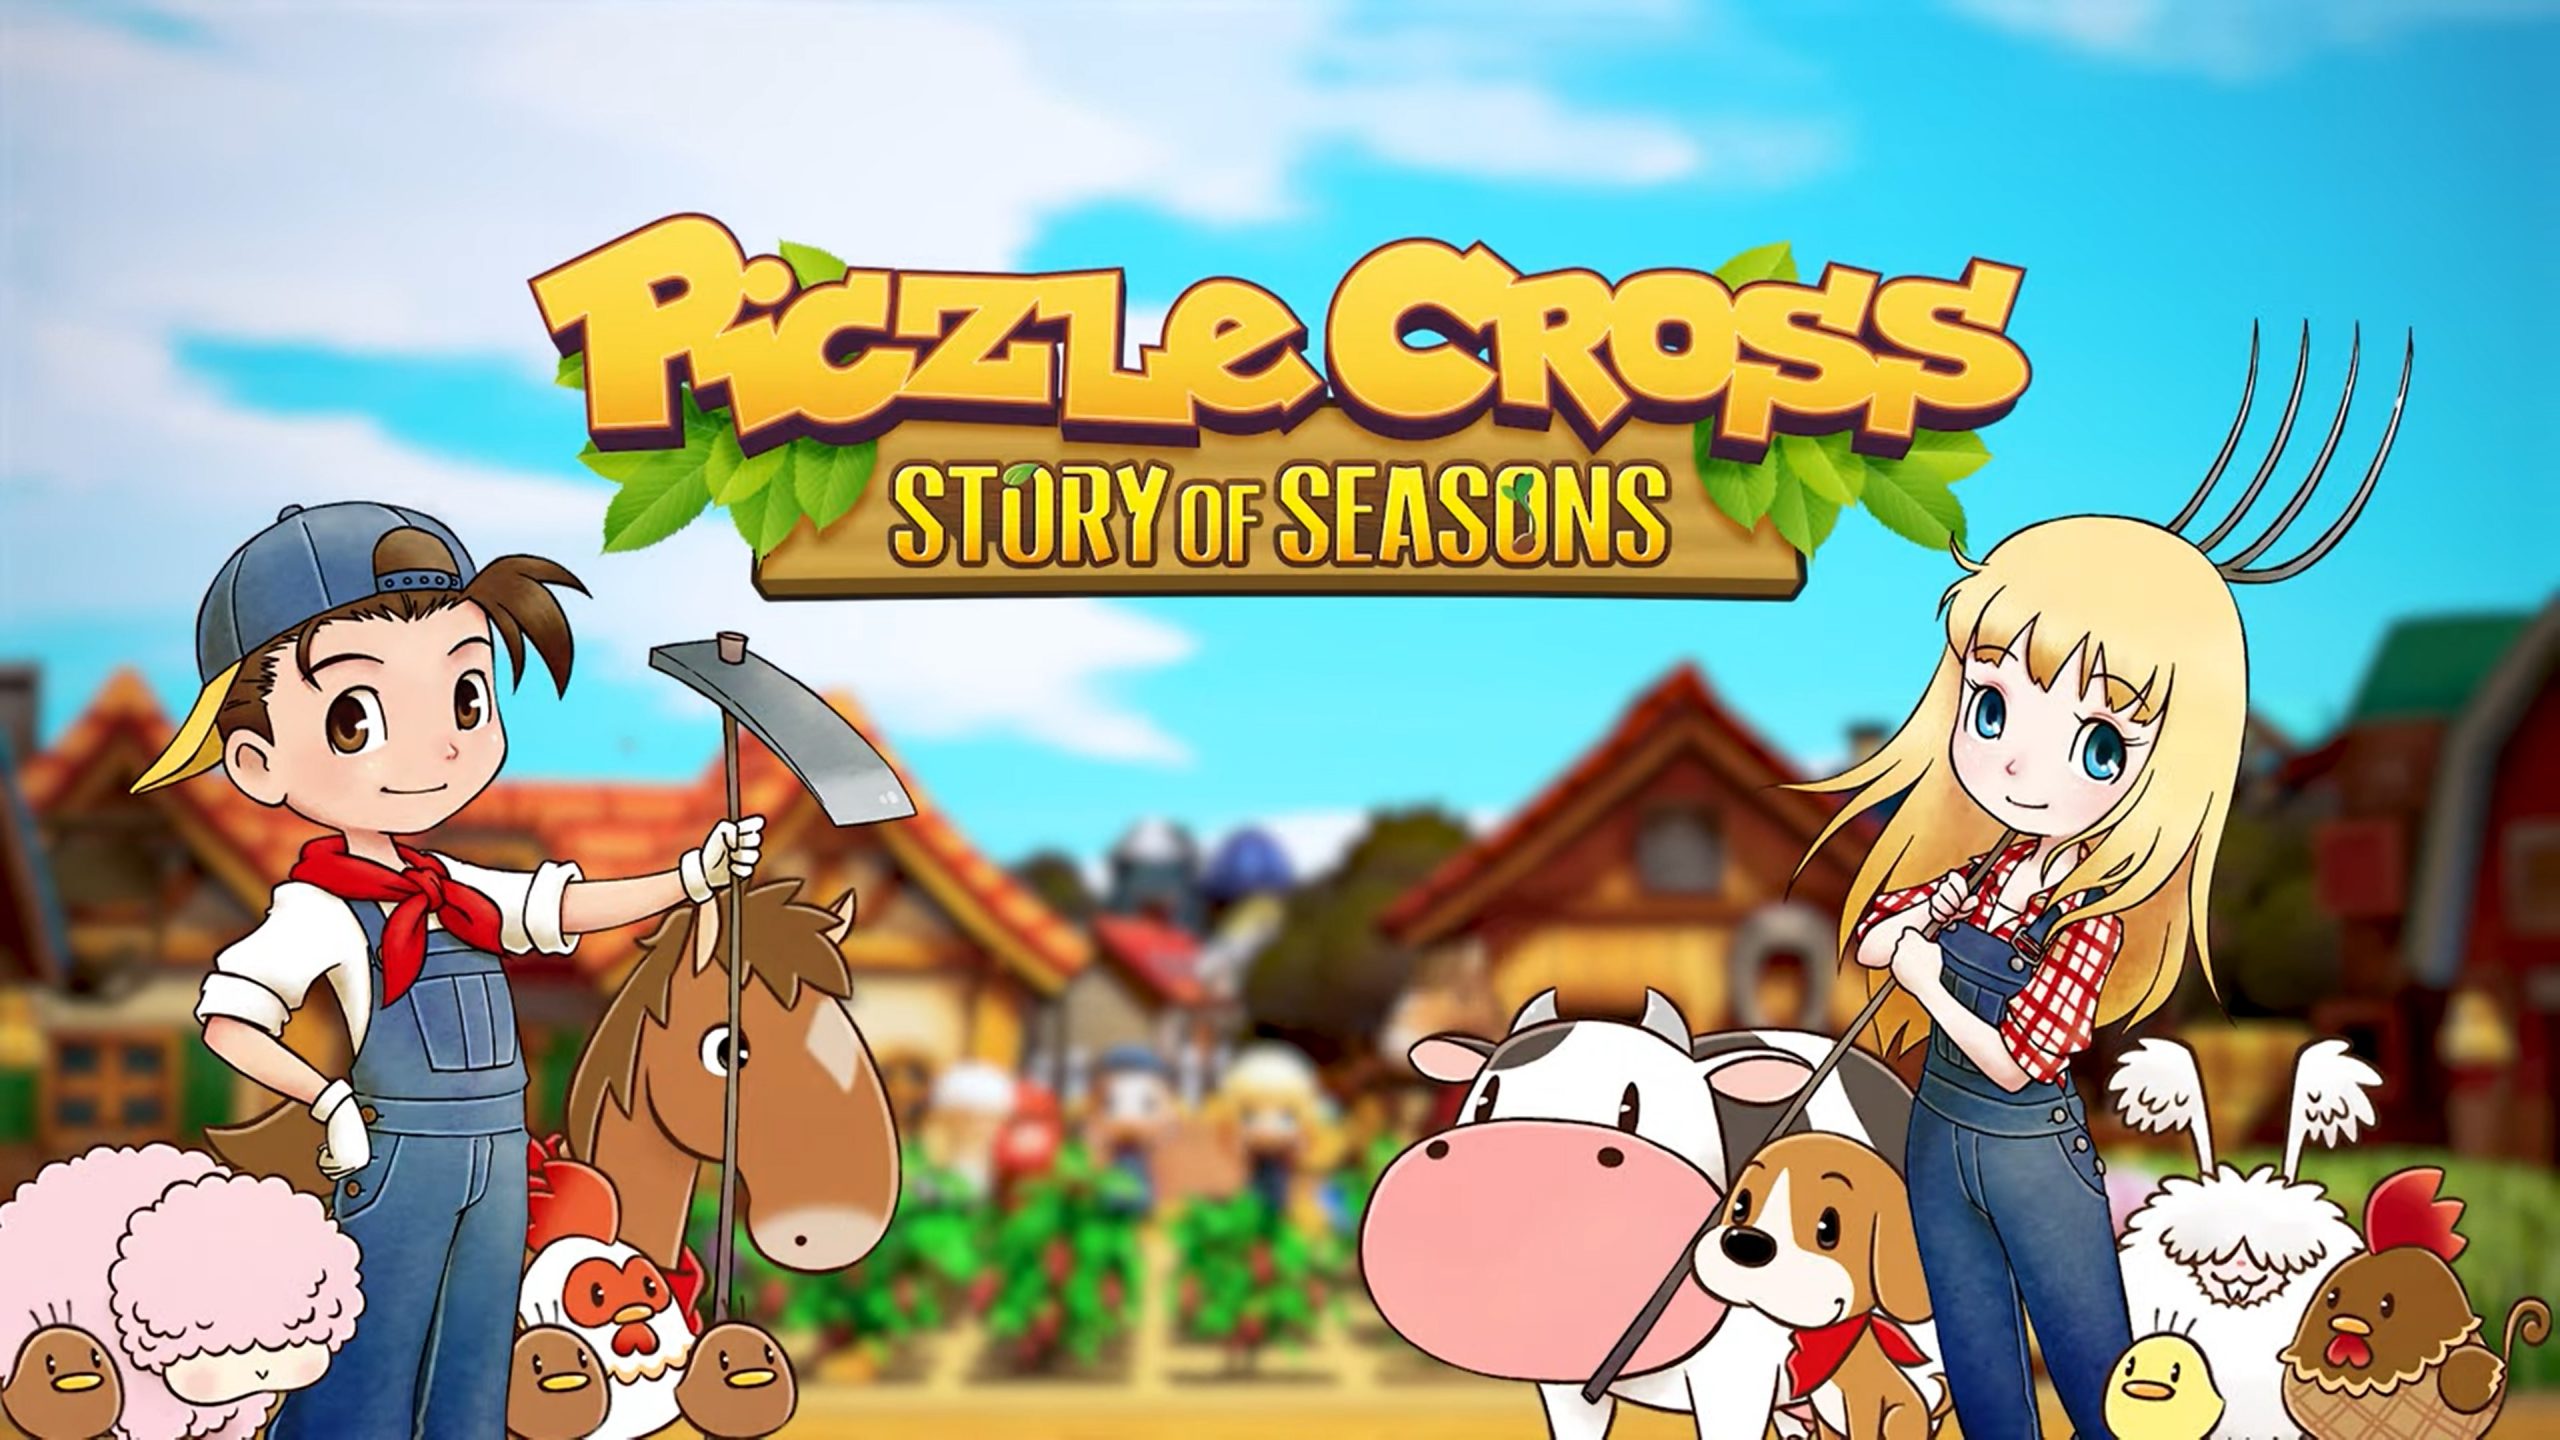 Piczle Cross: Story of Seasons features 350 puzzles on PC and Switch